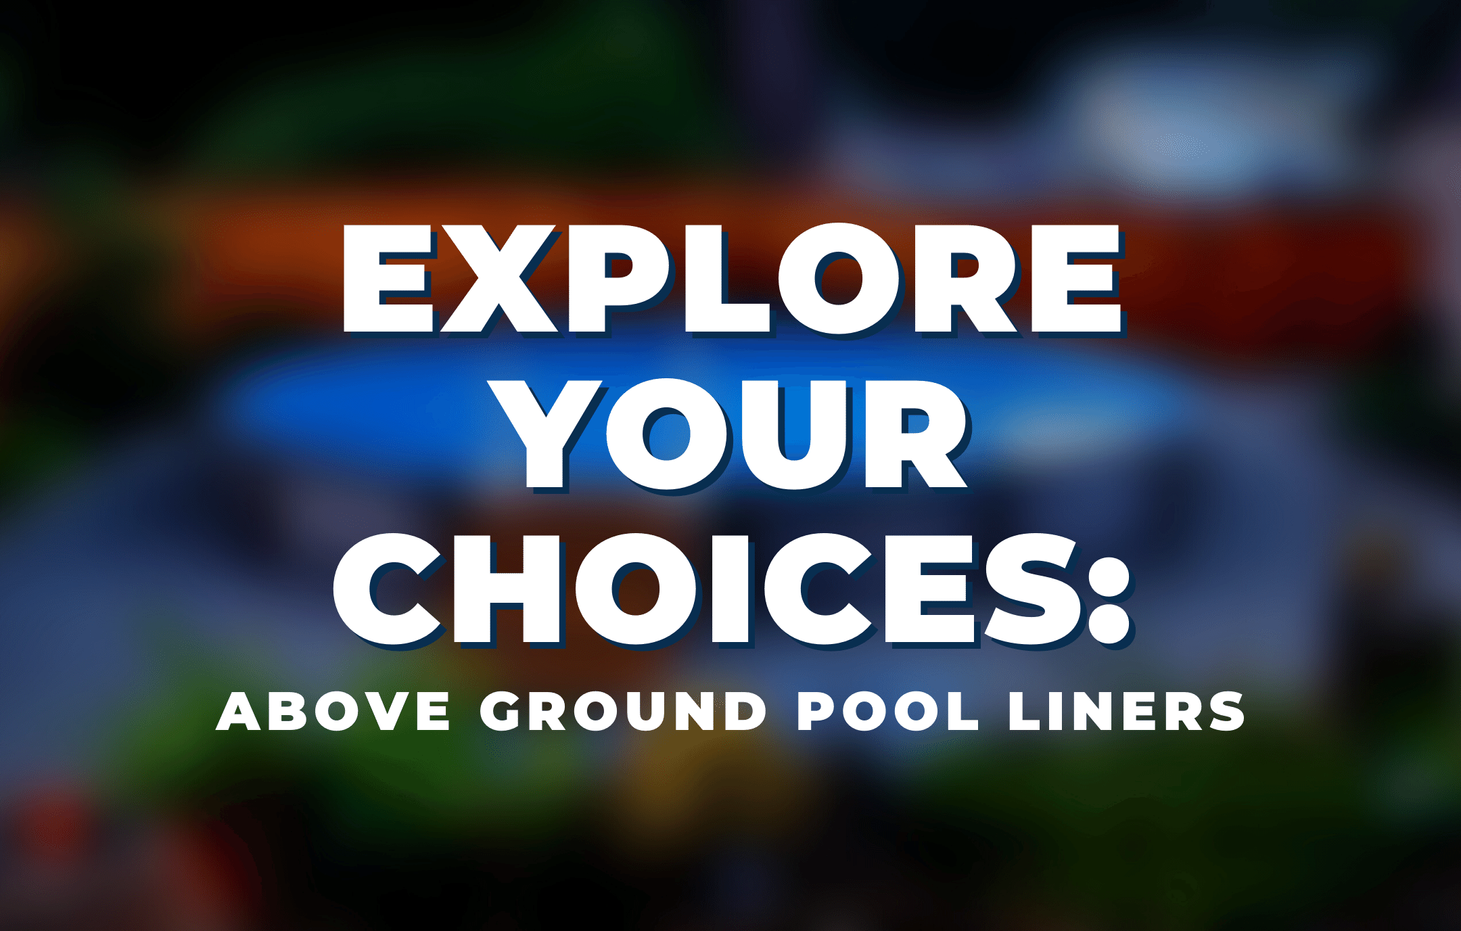 explore-your-choices-above ground-pool-liners.png__PID:c3fad129-3e11-4e1f-b99c-0fd400bb2bb6